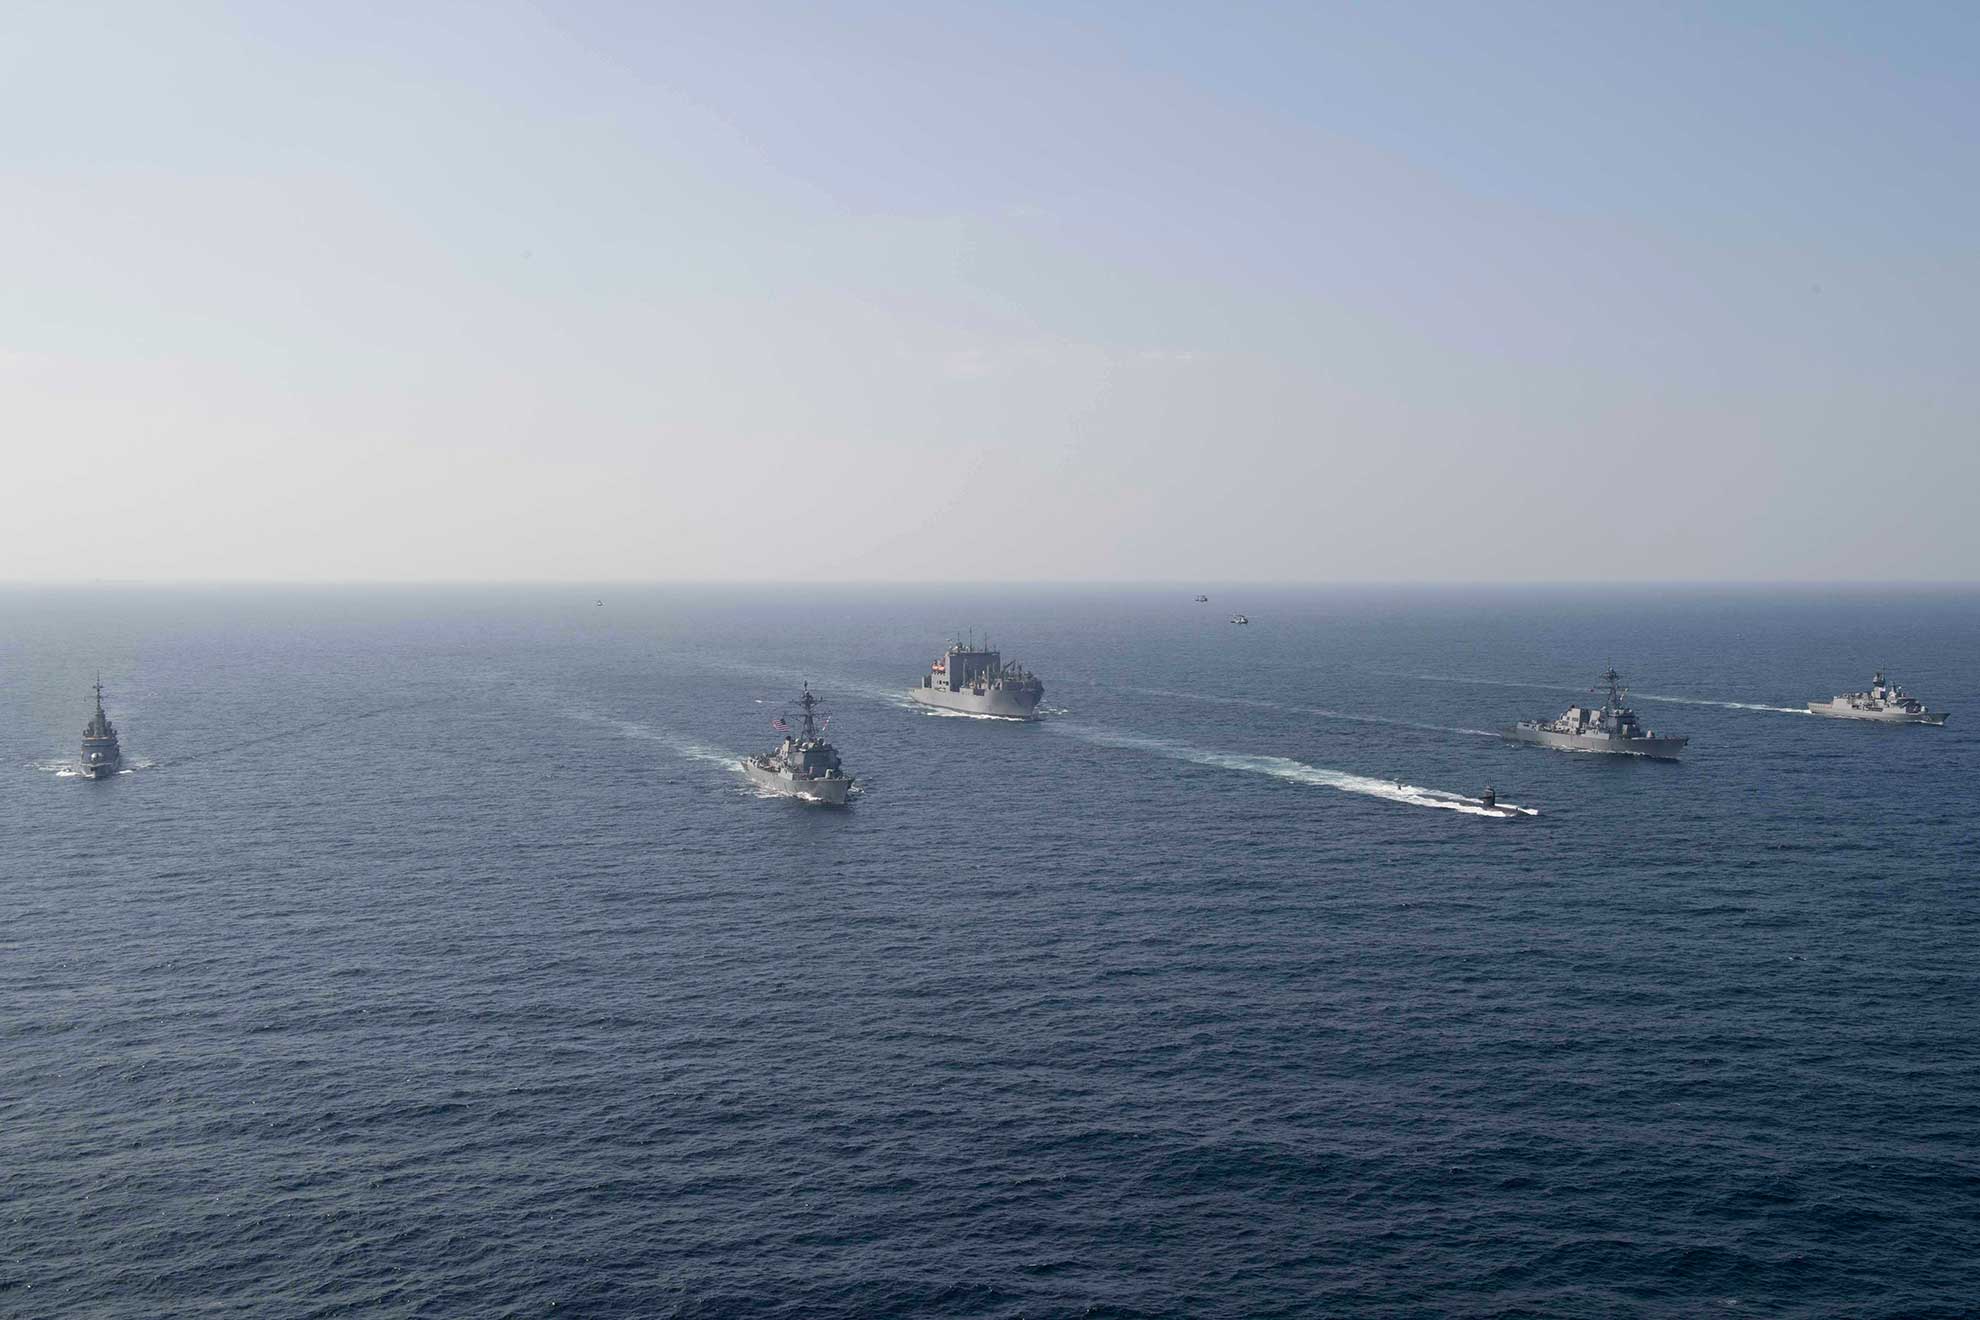 Arabian Sea (Dec. 18, 2018) The French navy air defense destroyer FS Cassard (D 614), left, the U.S. Navy guided-missile destroyer USS Stockdale (DDG 106), the fast attack submarine USS Louisville (SSN 724), the dry cargo and ammunition ship USNS Richard E. Byrd (T-AKE 4), the guided-missile destroyer USS Spruance (DDG 111), and the Royal Australian Navy frigate HMAS Ballarat (FFH 155) are underway in formation during the anti-submarine warfare exercise SHAREM 195 in the Arabian Sea, Dec. 18, 2018. Stockdale and Spruance are deployed to the U.S. 5th Fleet area of operations in support of naval operations to ensure maritime stability and security in the Central Region, connecting the Mediterranean and the Pacific through the western Indian Ocean and three strategic choke points -- U.S. Navy photo by MCS1 Ryan D. McLearnon. -